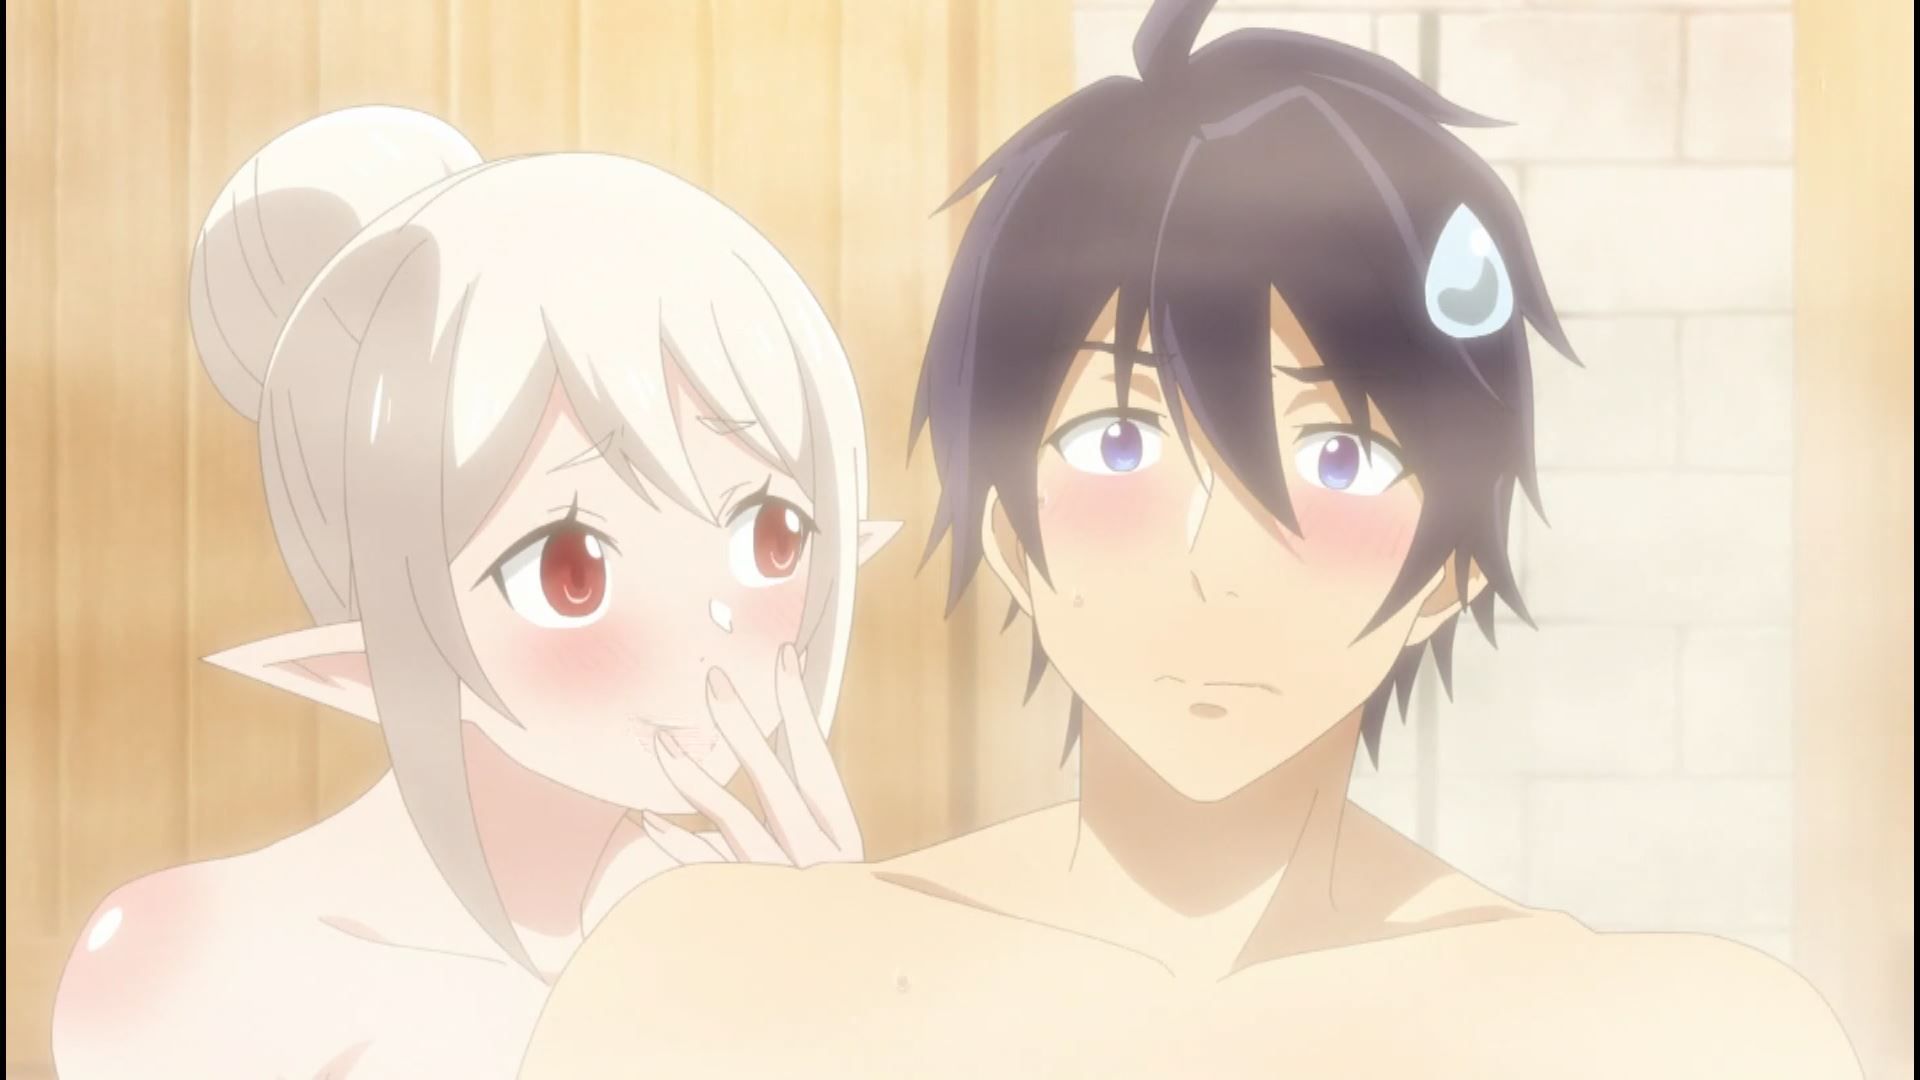 In episode 4 of the anime "True Companion", there is an erotic scene where you enter the sauna naked with an erotic boob girl! 16